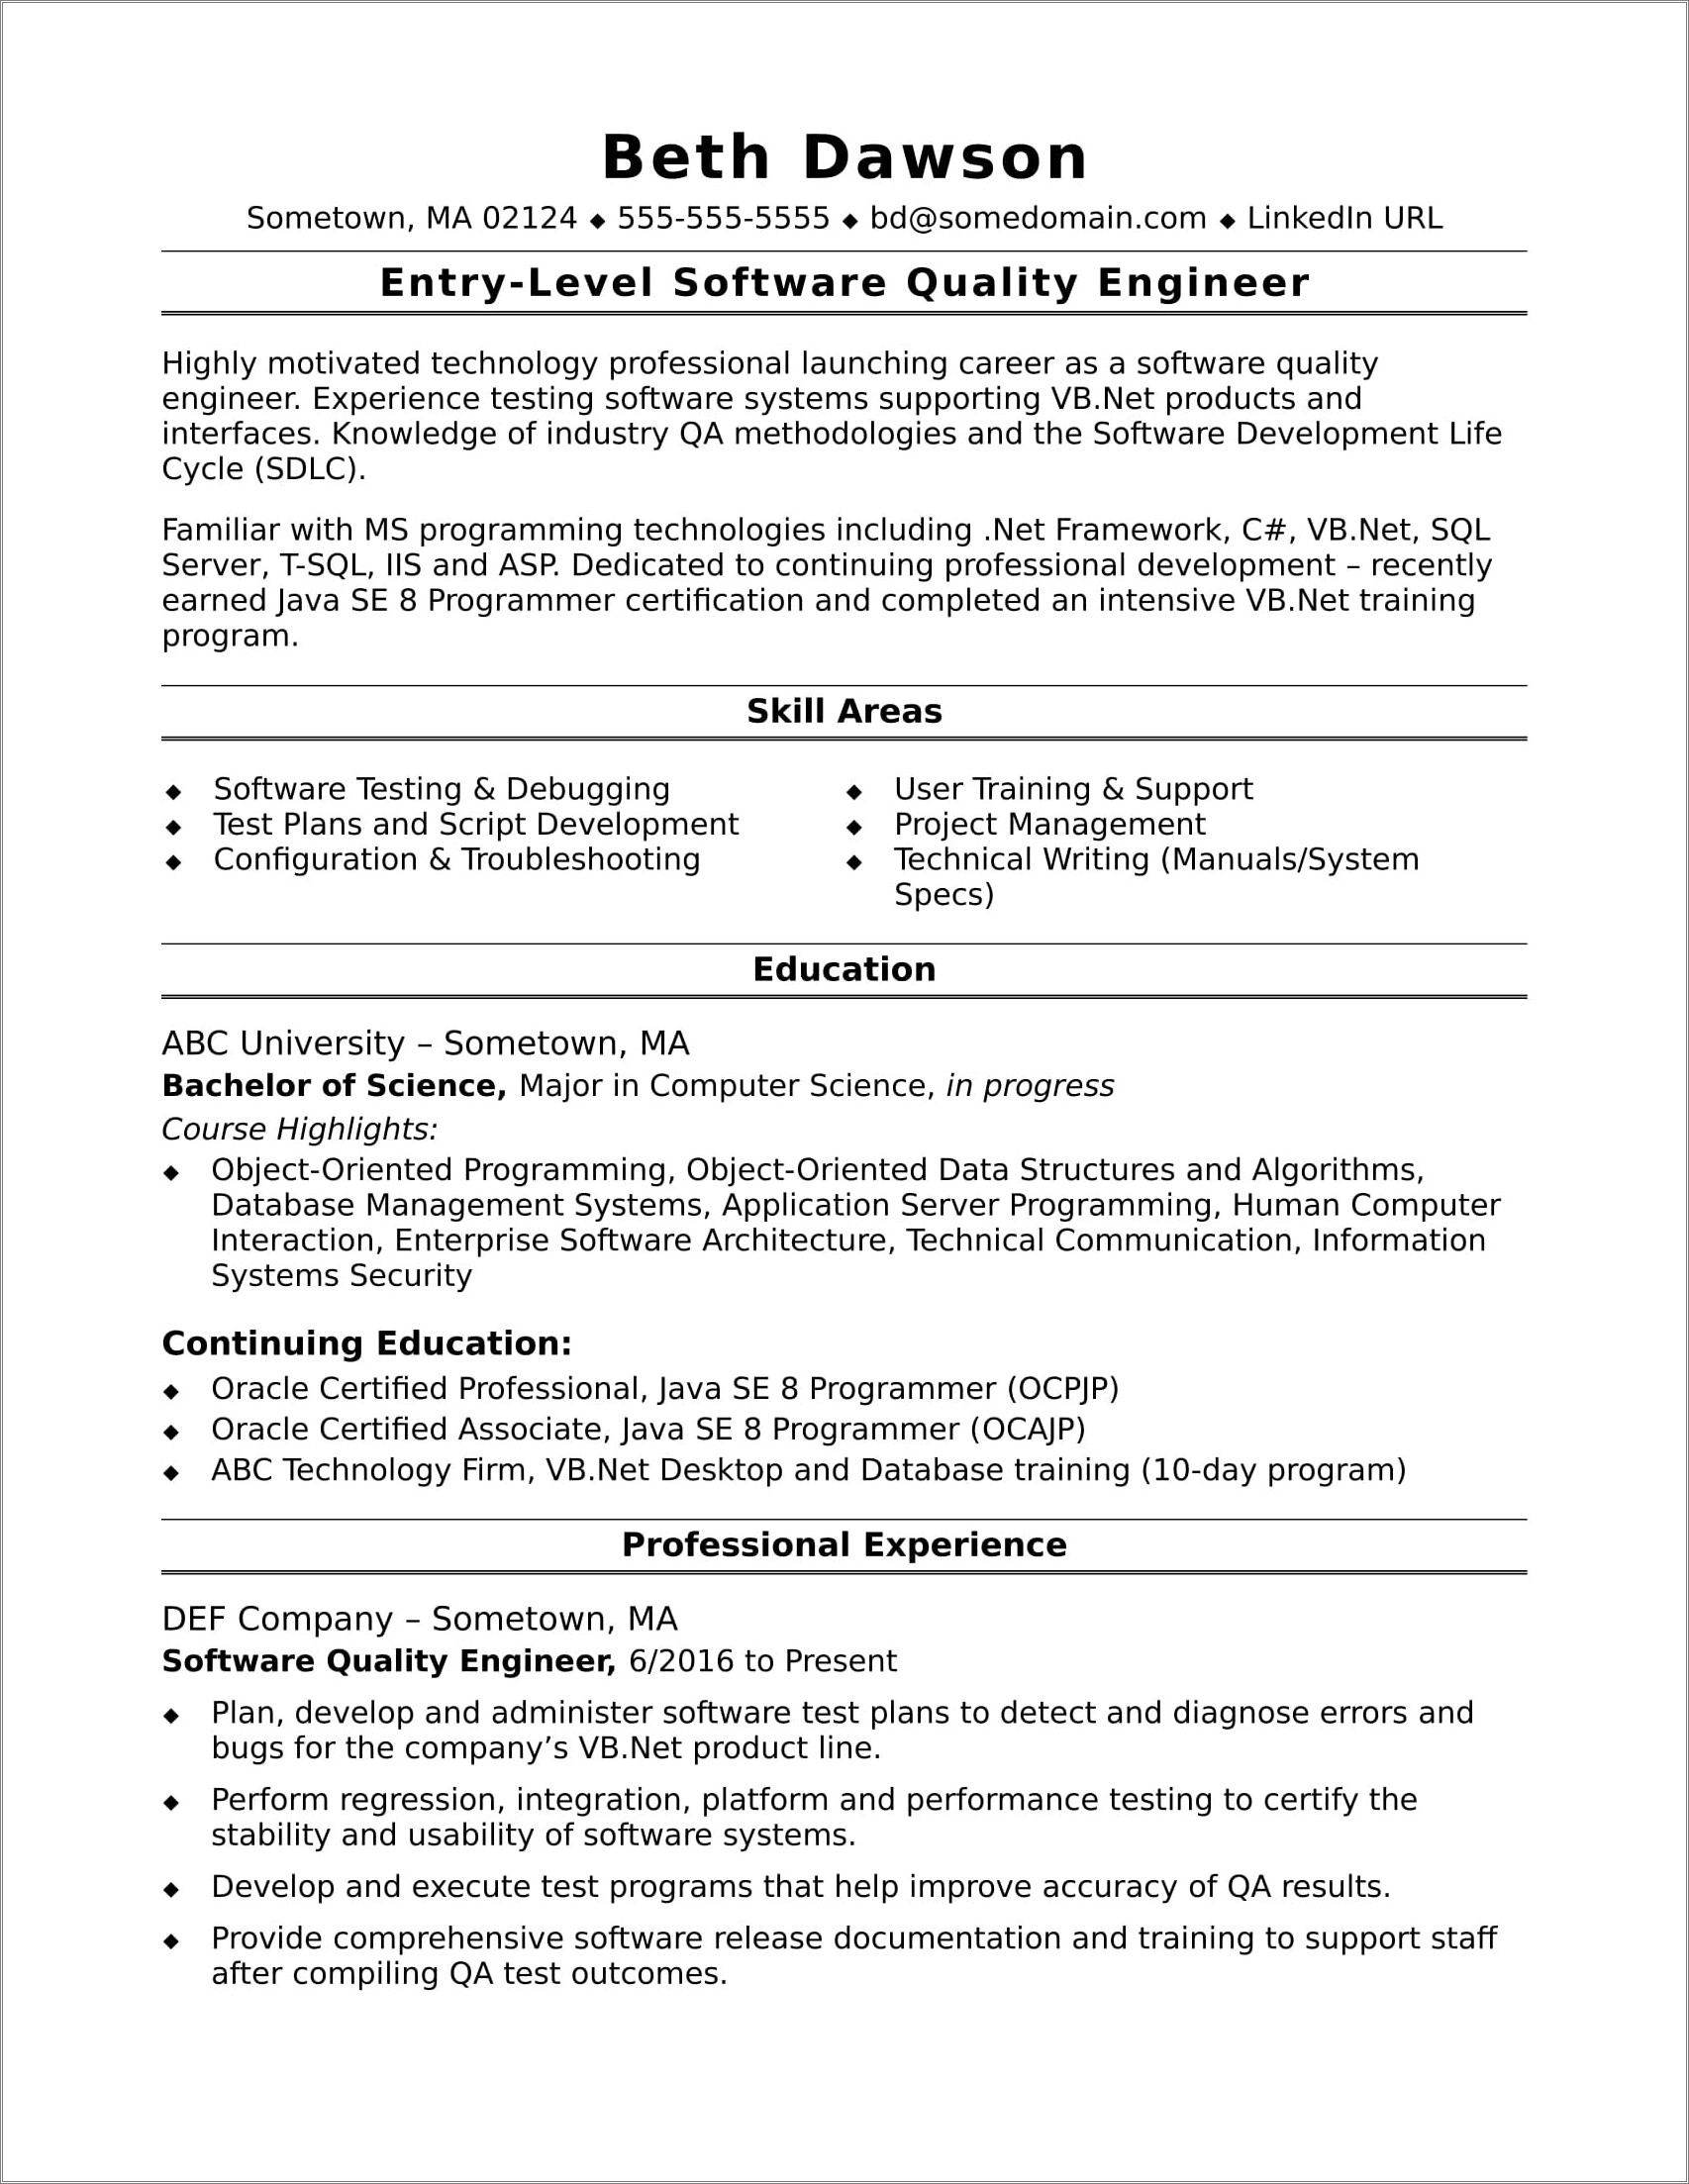 Microsoft Word Resume Table Insert New Entry